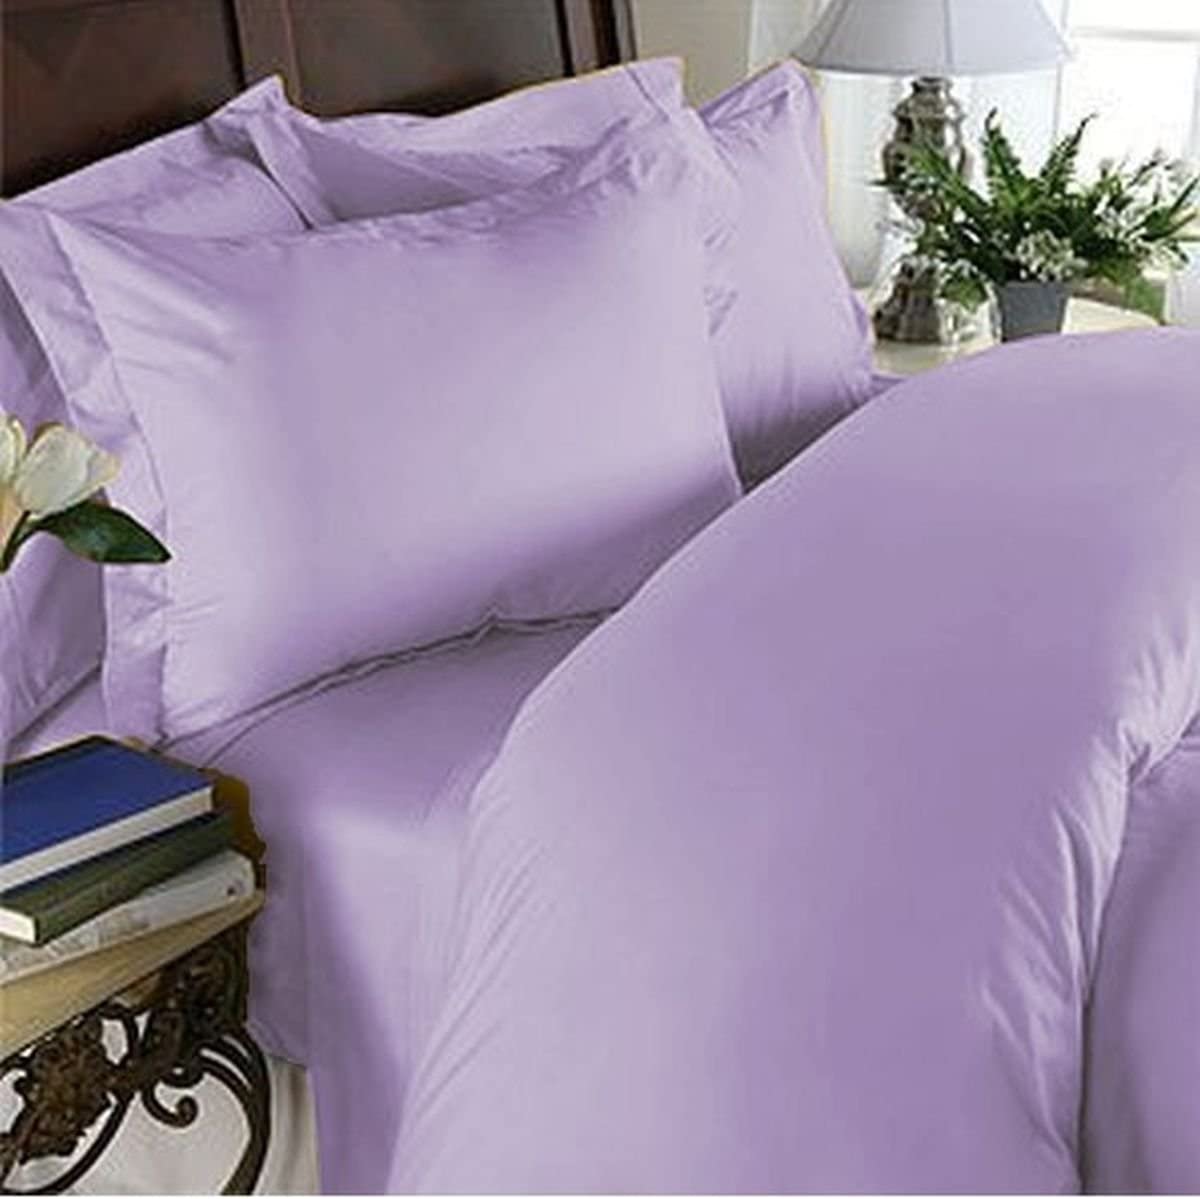 Buy Calking Size Flat Sheet Lavender Egyptian Cotton 1000 Thread Count at- Egyptianhomelinens.com